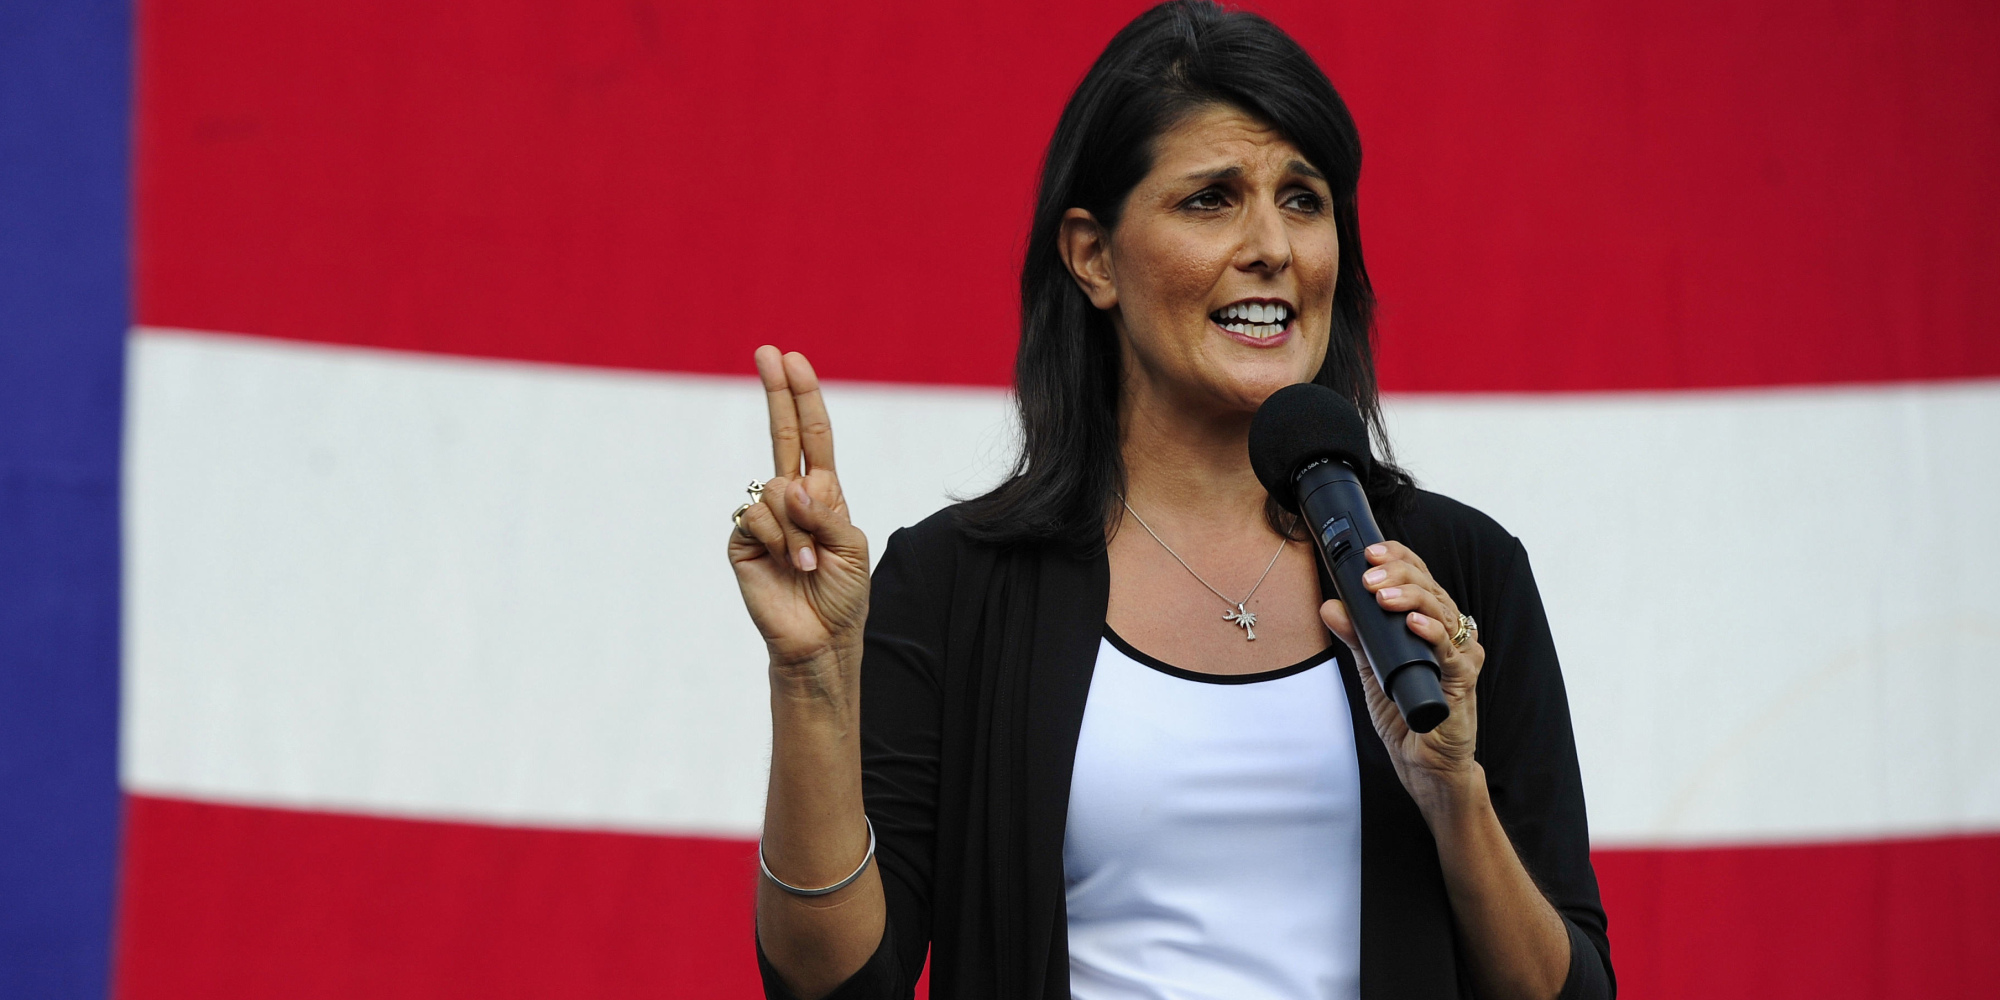 Why Nikki Haley’s endorsement is so good for Marco Rubio — and so devastating for Jeb Bush